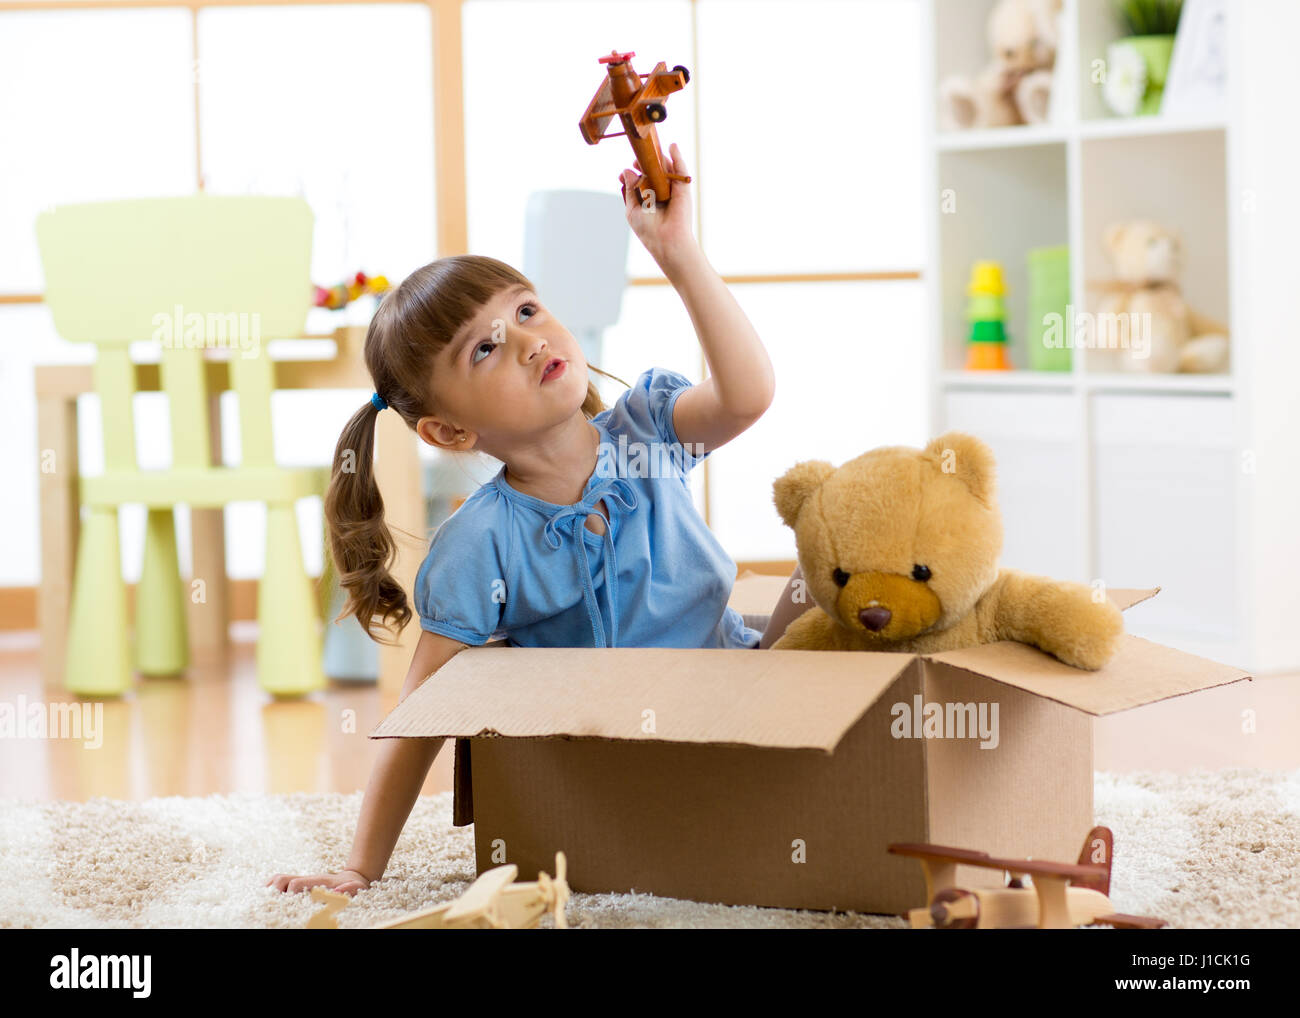 Kid playing with plane toy at home. Travel, freedom and imagination concept. Stock Photo